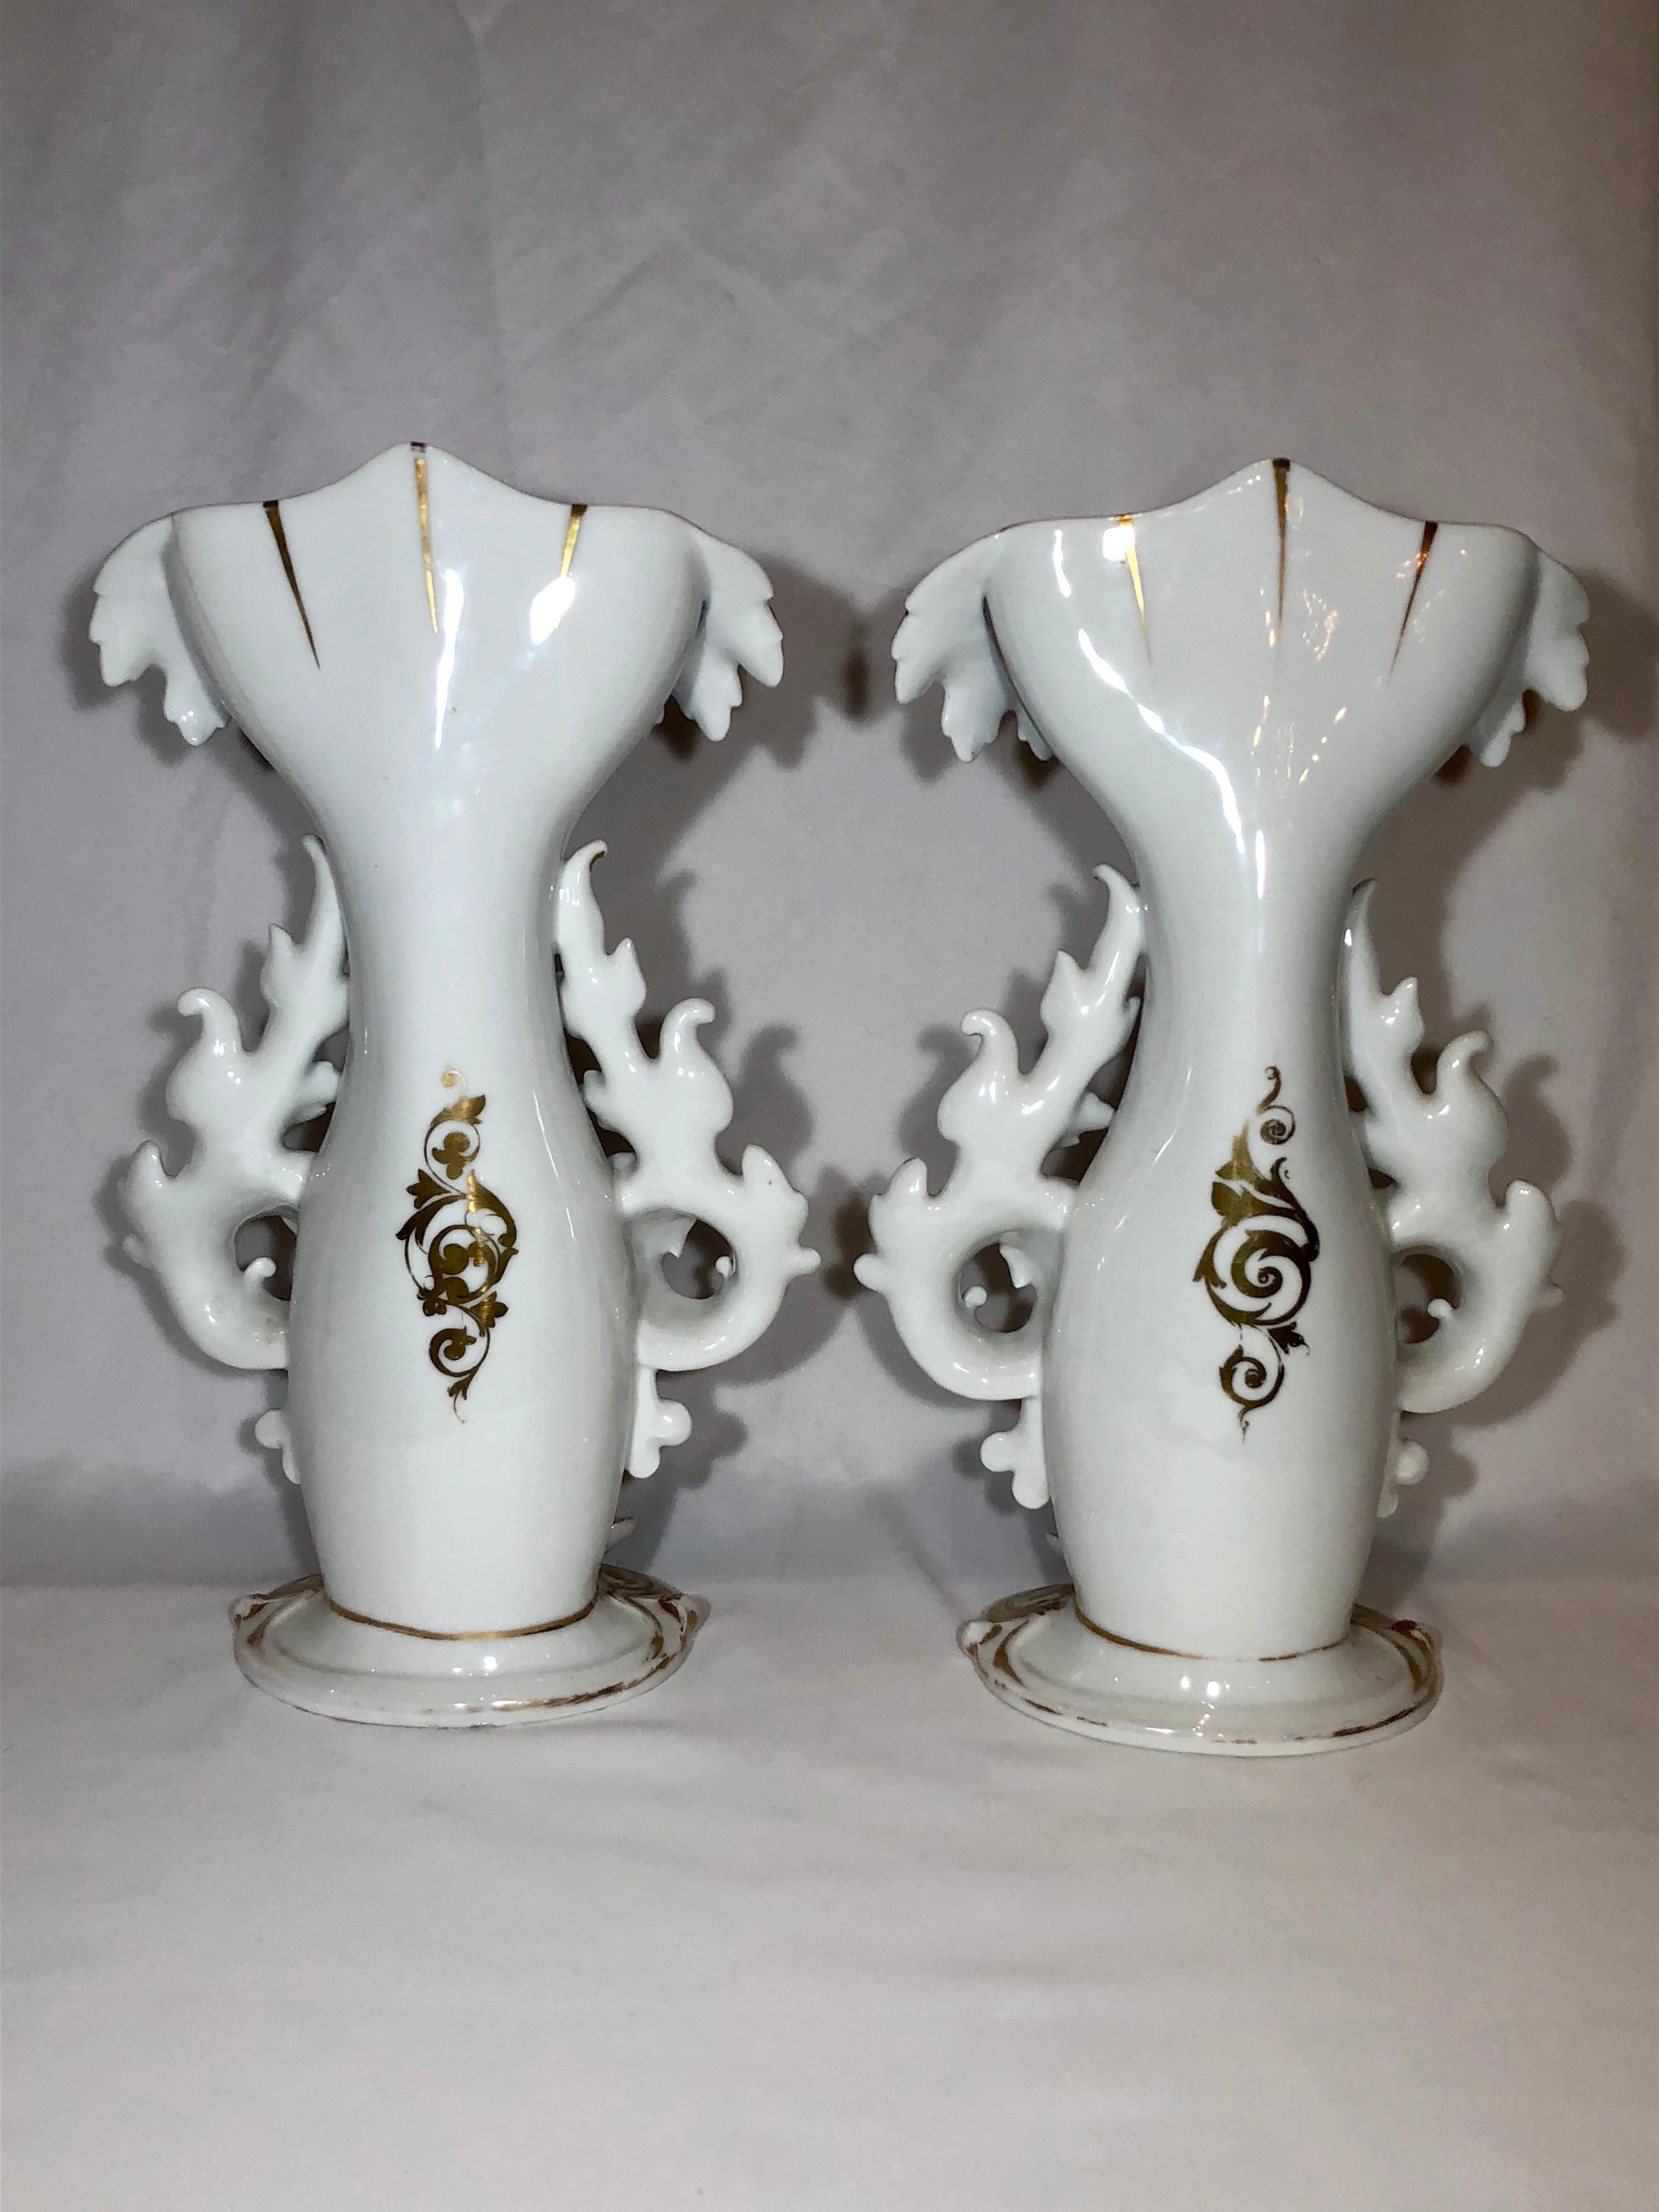 Pair of antique mid-19th century Old Paris vases. From a Louisiana estate. These are beautiful and boast unusual, strong colors.